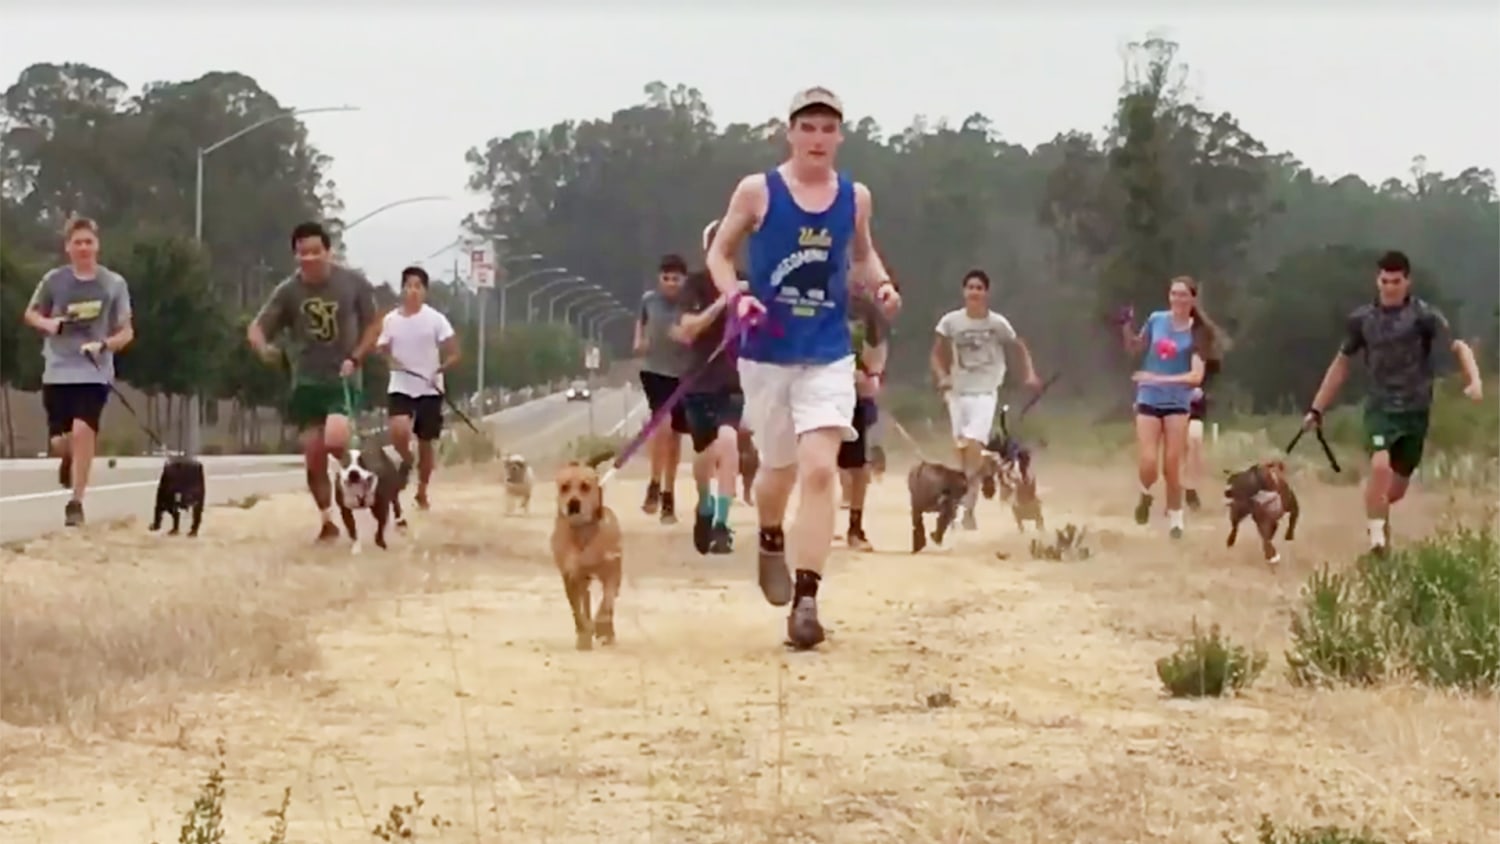 High school cross country team takes a joyous run with local shelter dogs